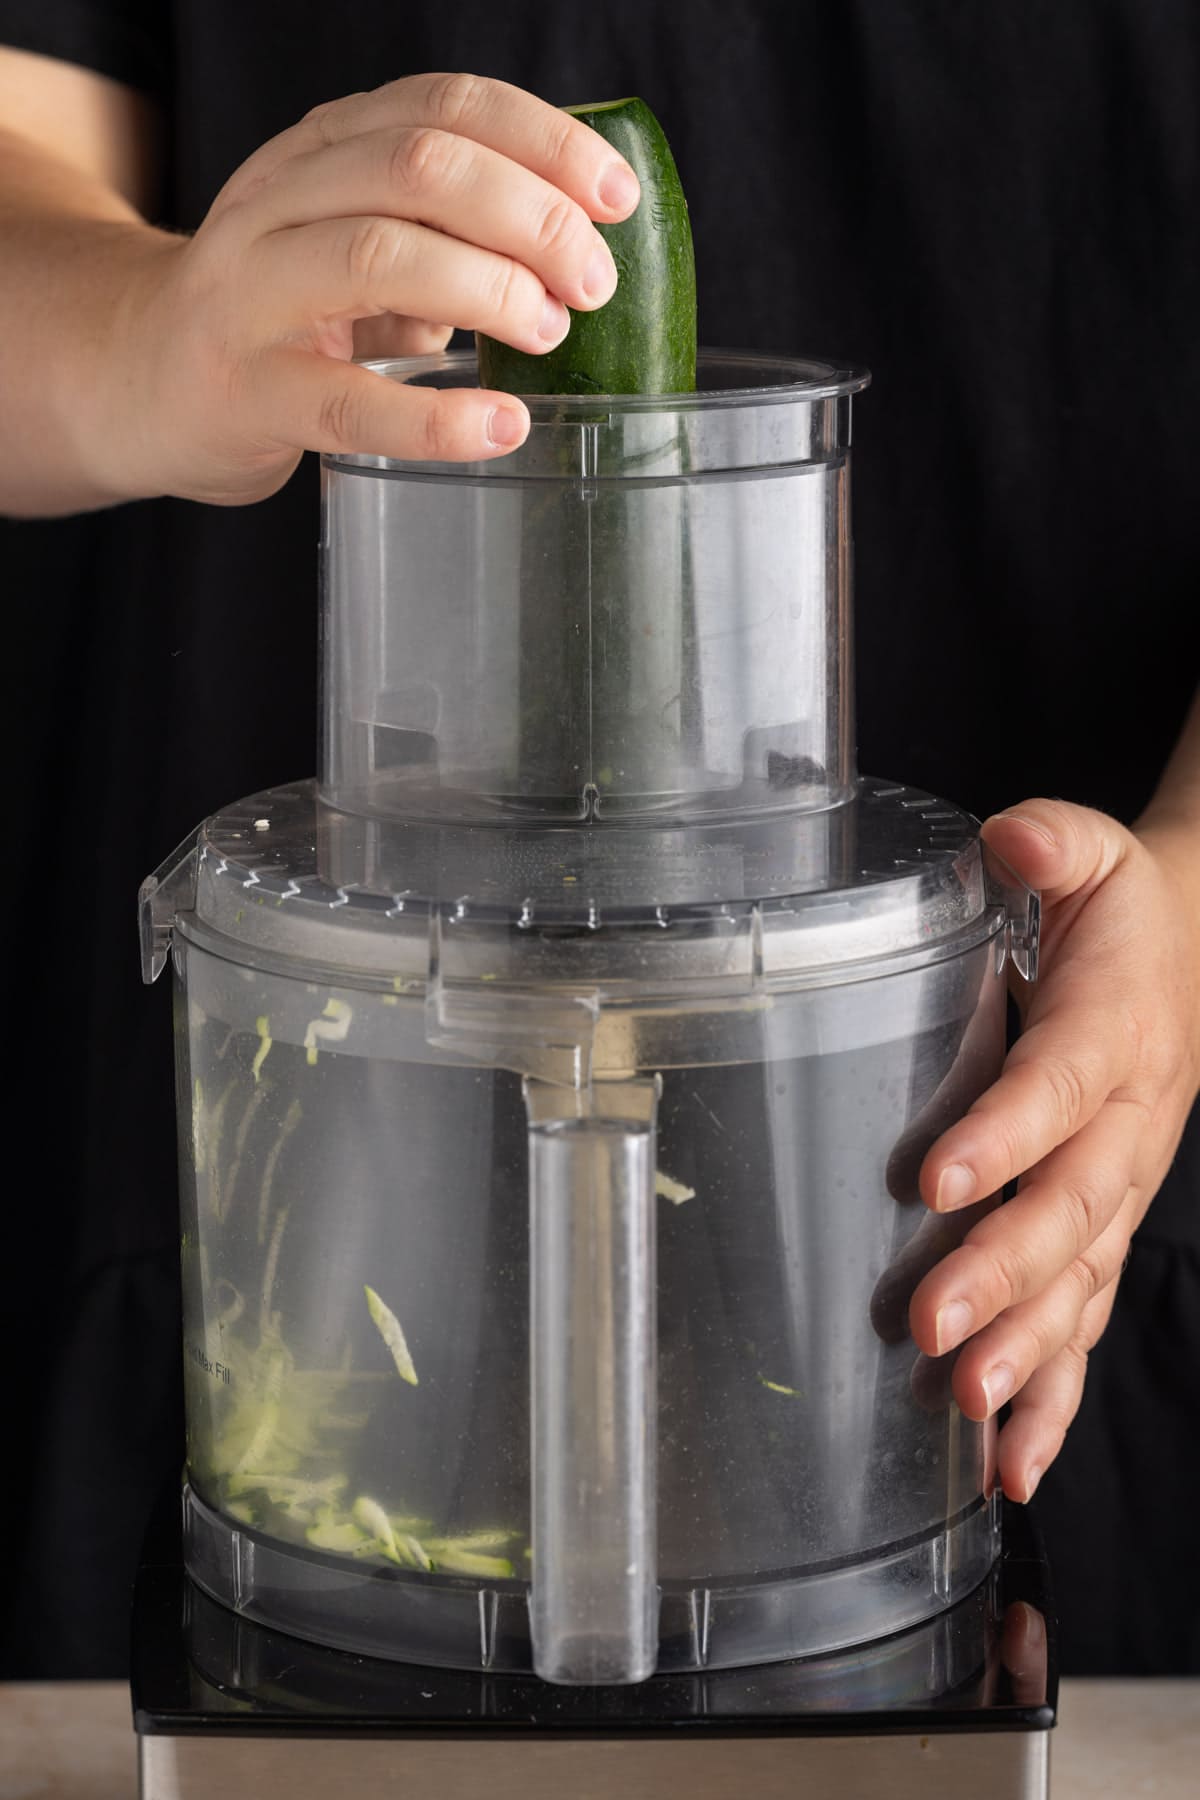 Using a food processor to shred zucchini